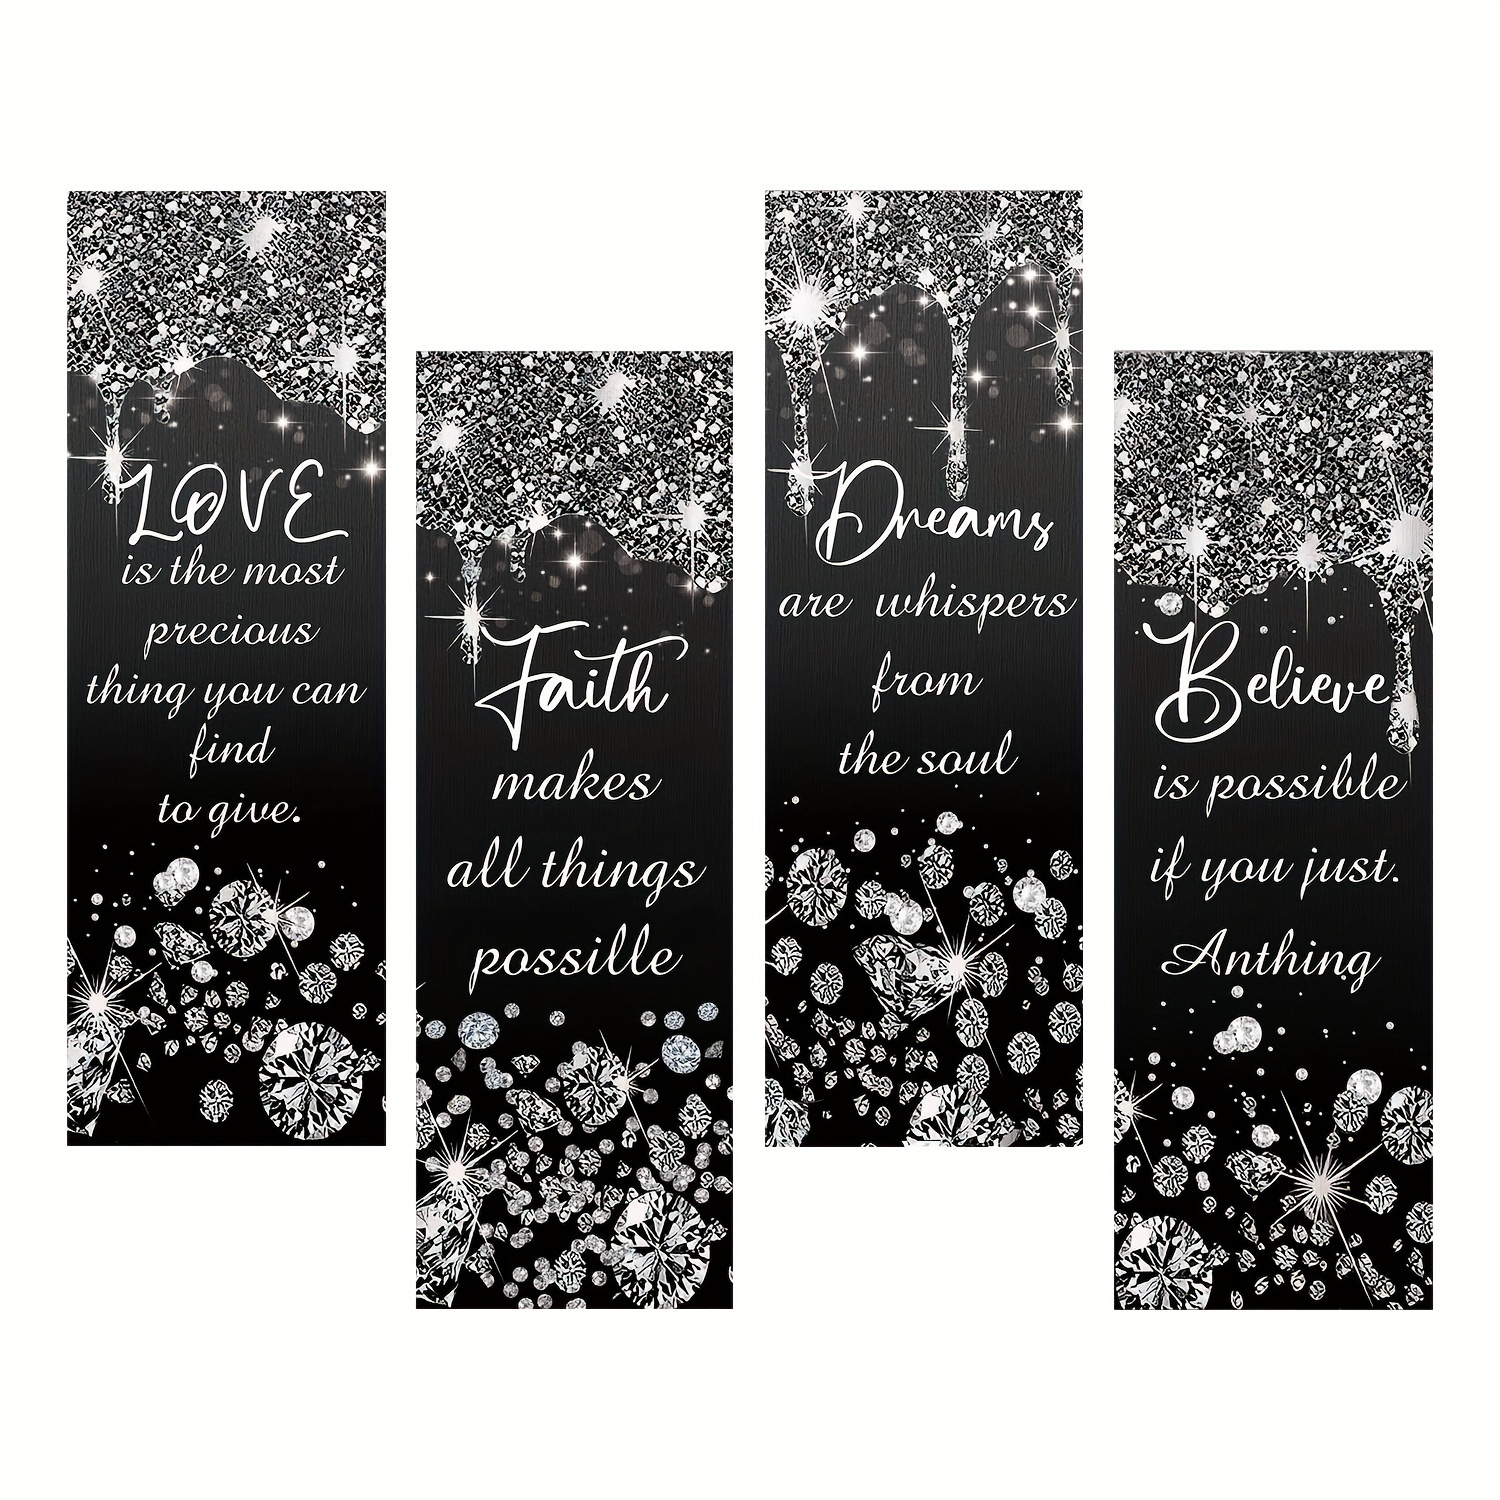 

4pcs Glitter Diamond Bathroom Wall Decor Wooden Inspirational Quote Wooden Sign Love Faith Believe Dream Wall Decor Bathroom Decor Black Silver Shiny Drips Hanging Bathroom Sign For Living Room Home